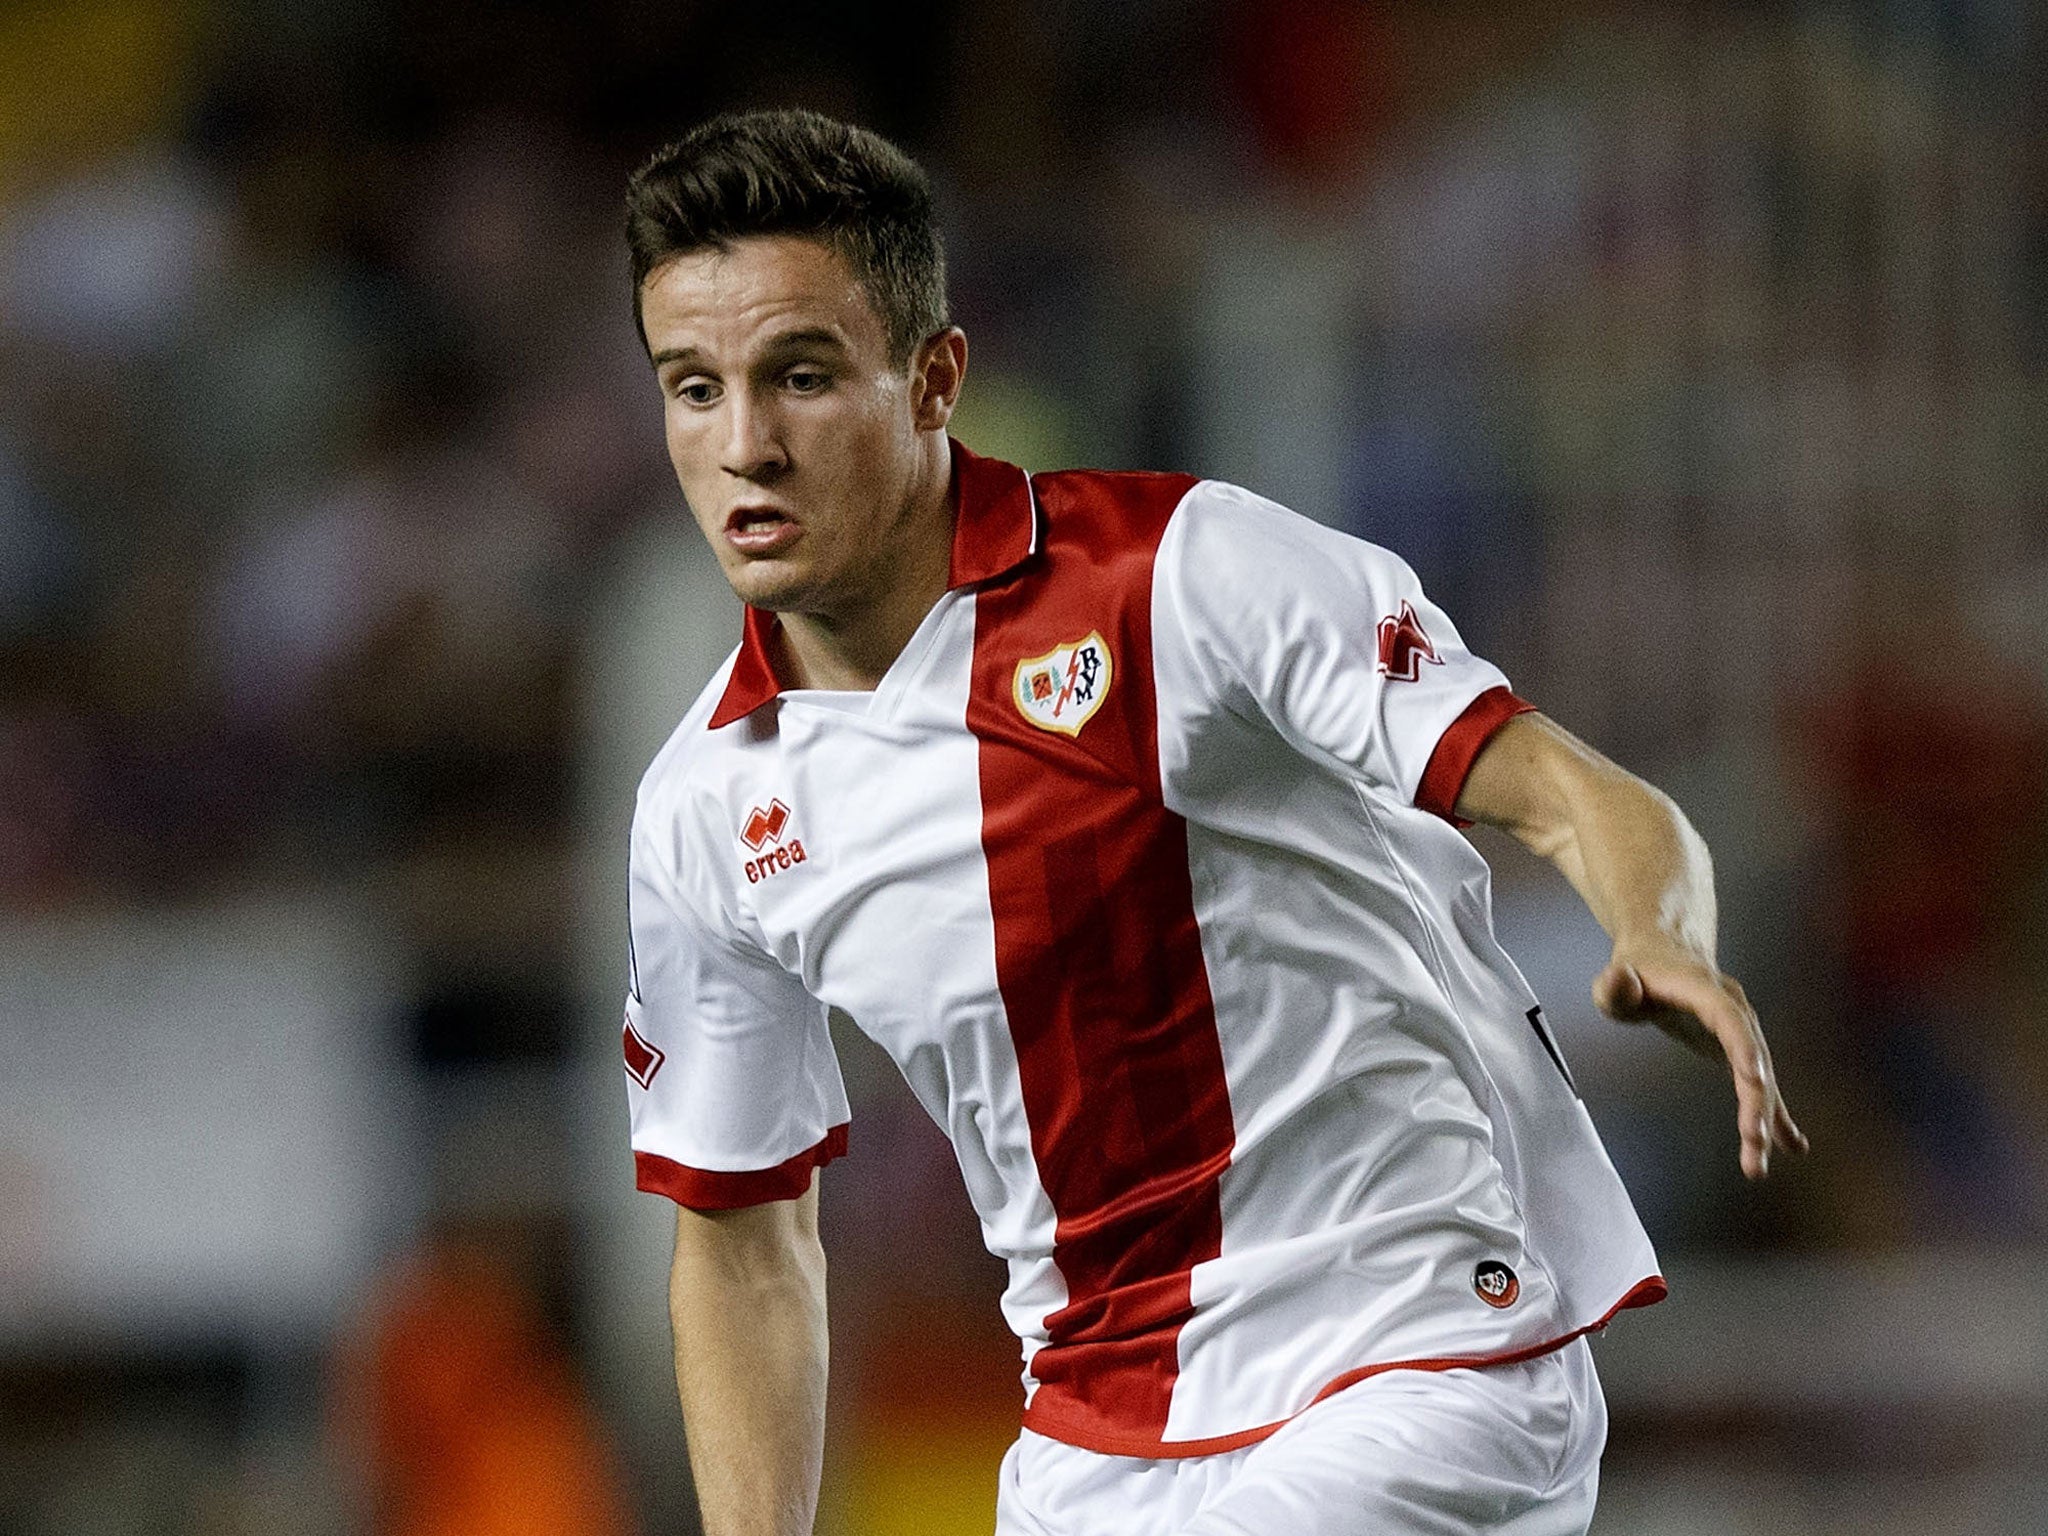 Atletico Madrid midfielder Saul Niguez, on loan with Rayo Vallecano, in action against Real Madrid in August